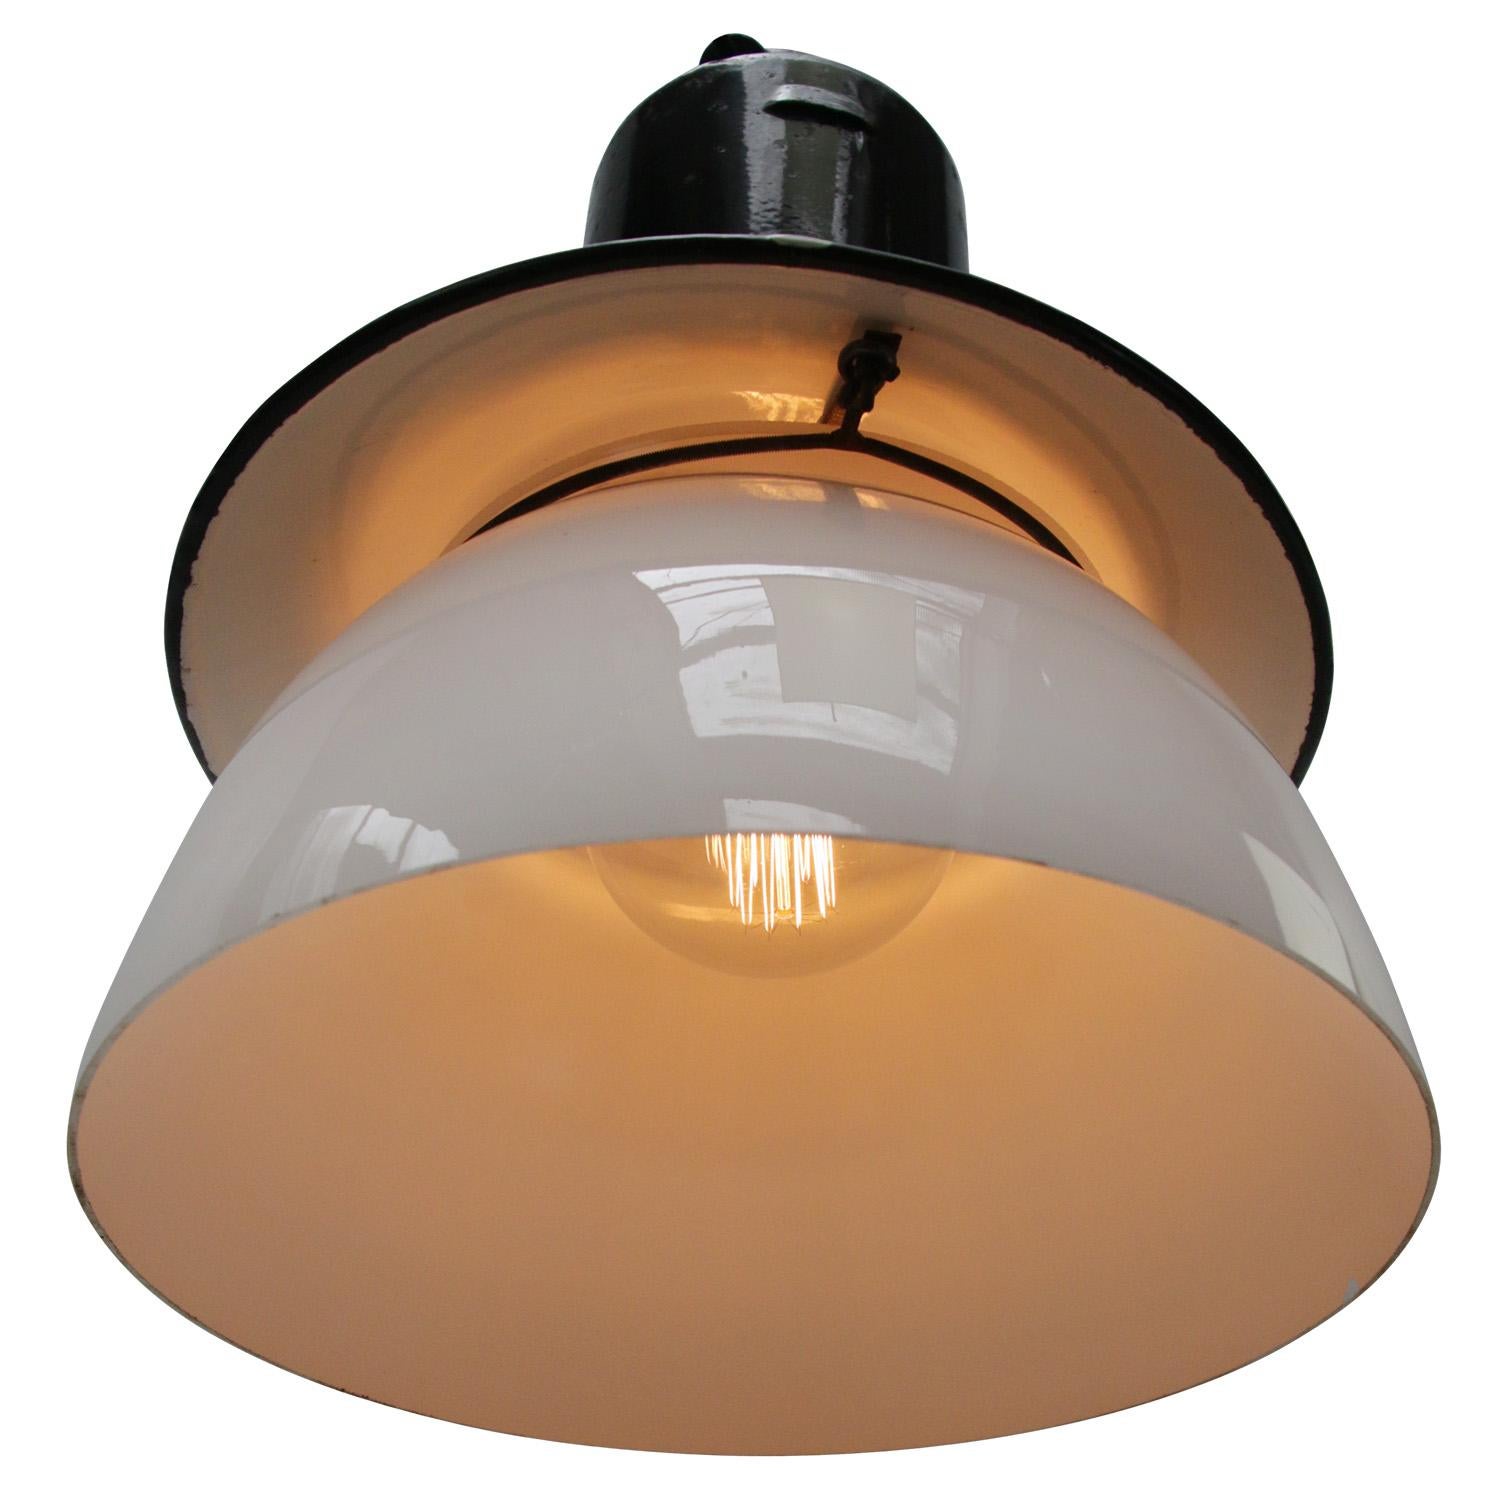 Black enamel factory pendant light
White glass. Cast iron top

Weight 5.90 kg / 13 lb

Priced per individual item. All lamps have been made suitable by international standards for incandescent light bulbs, energy-efficient and LED bulbs.